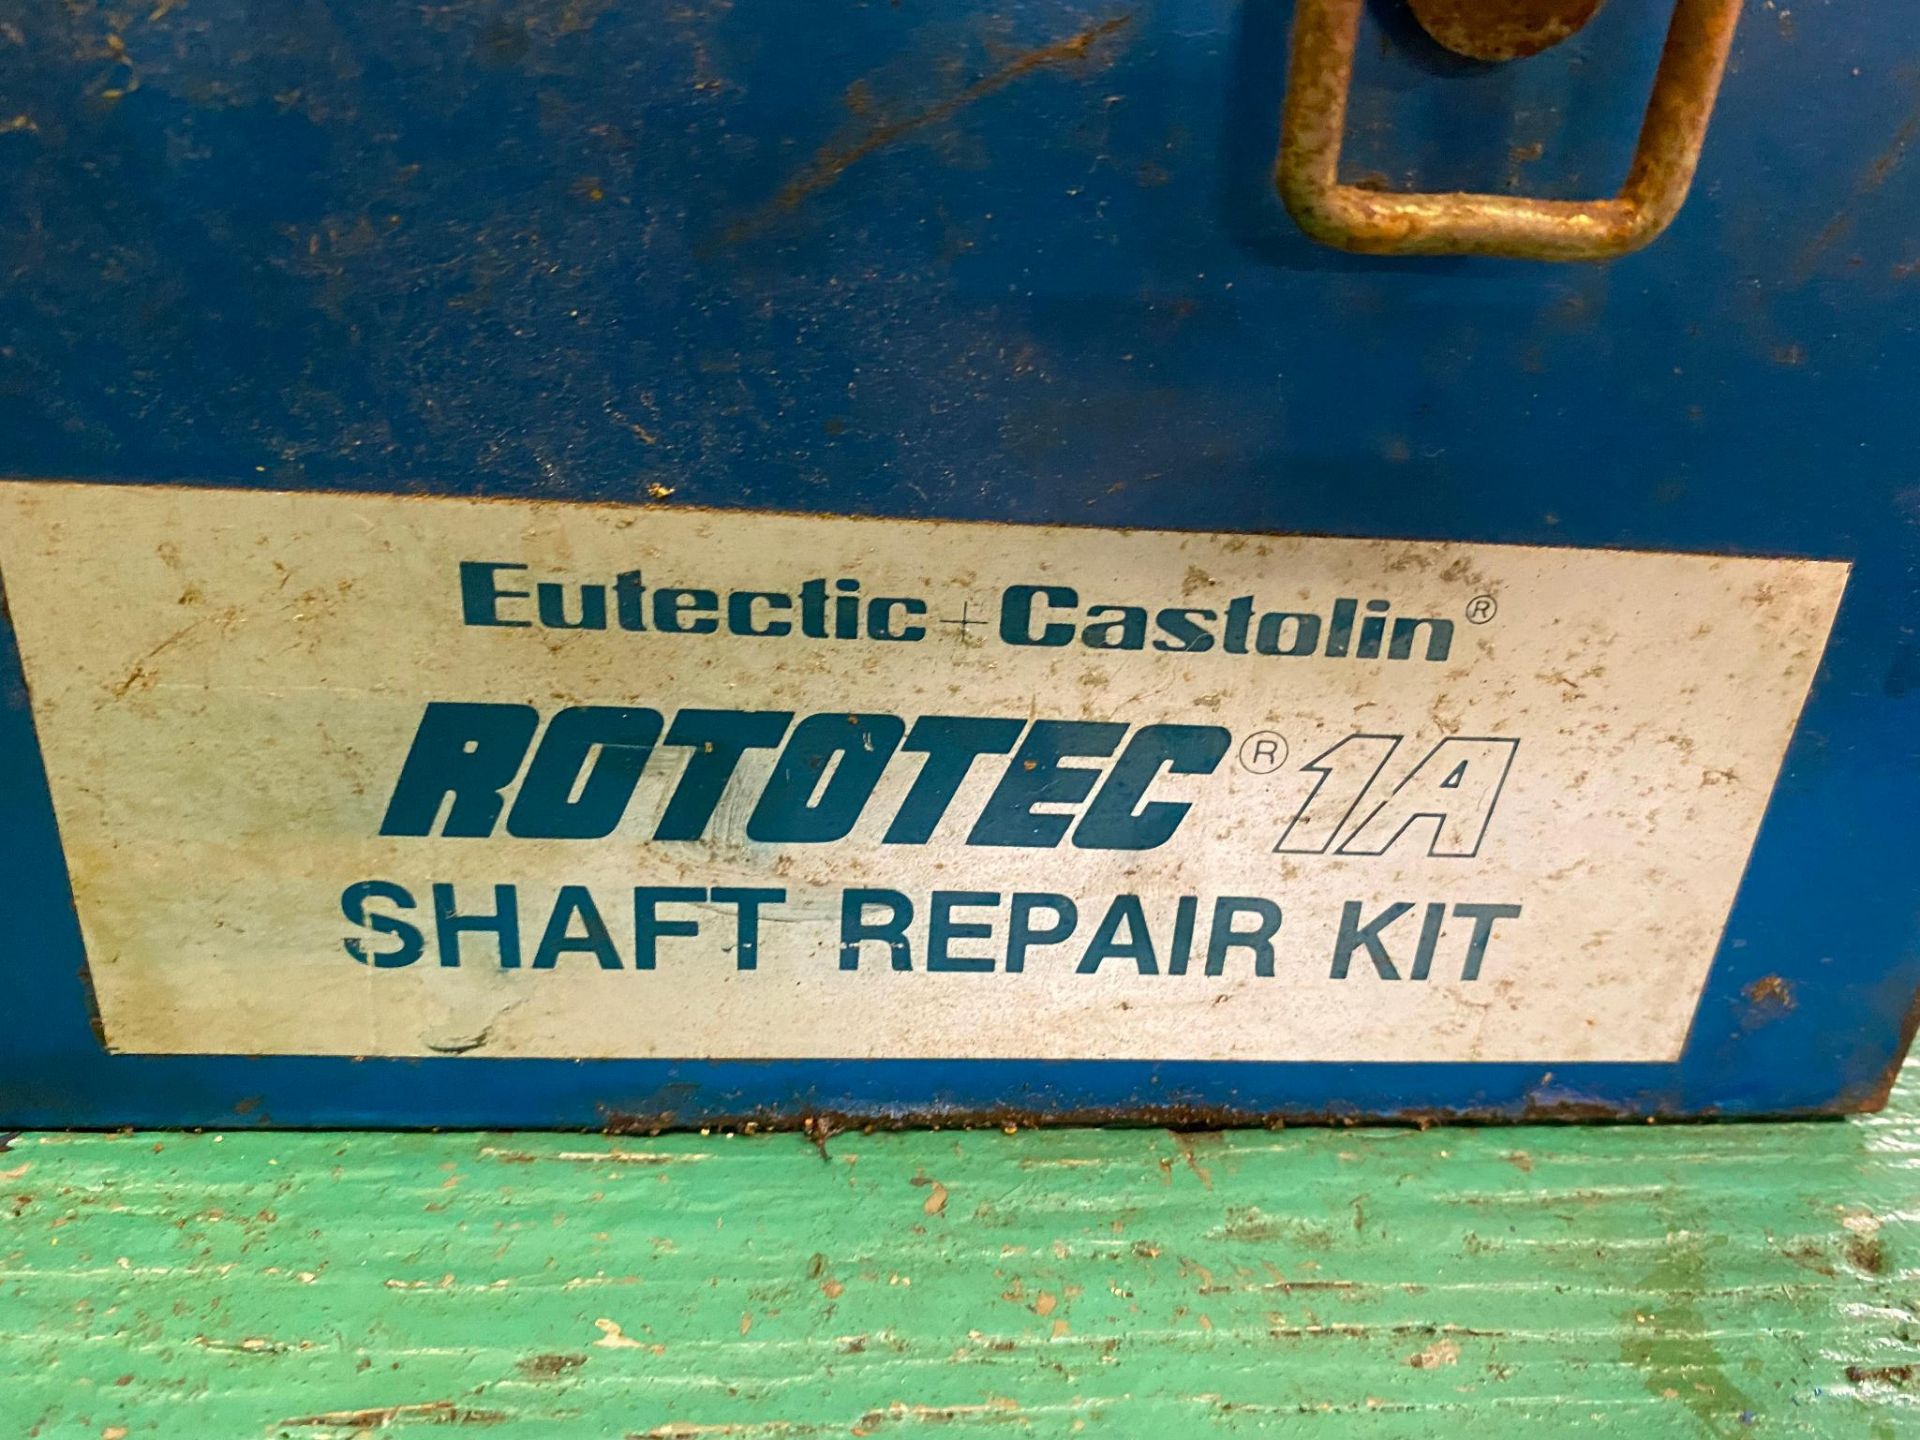 SPRAY WELDING SHAFT REPAIR KIT, EUTECTIC CASTOLIN ROTOTEC 1A, S/N 62214 (Located at: P & M Machine, - Image 2 of 2